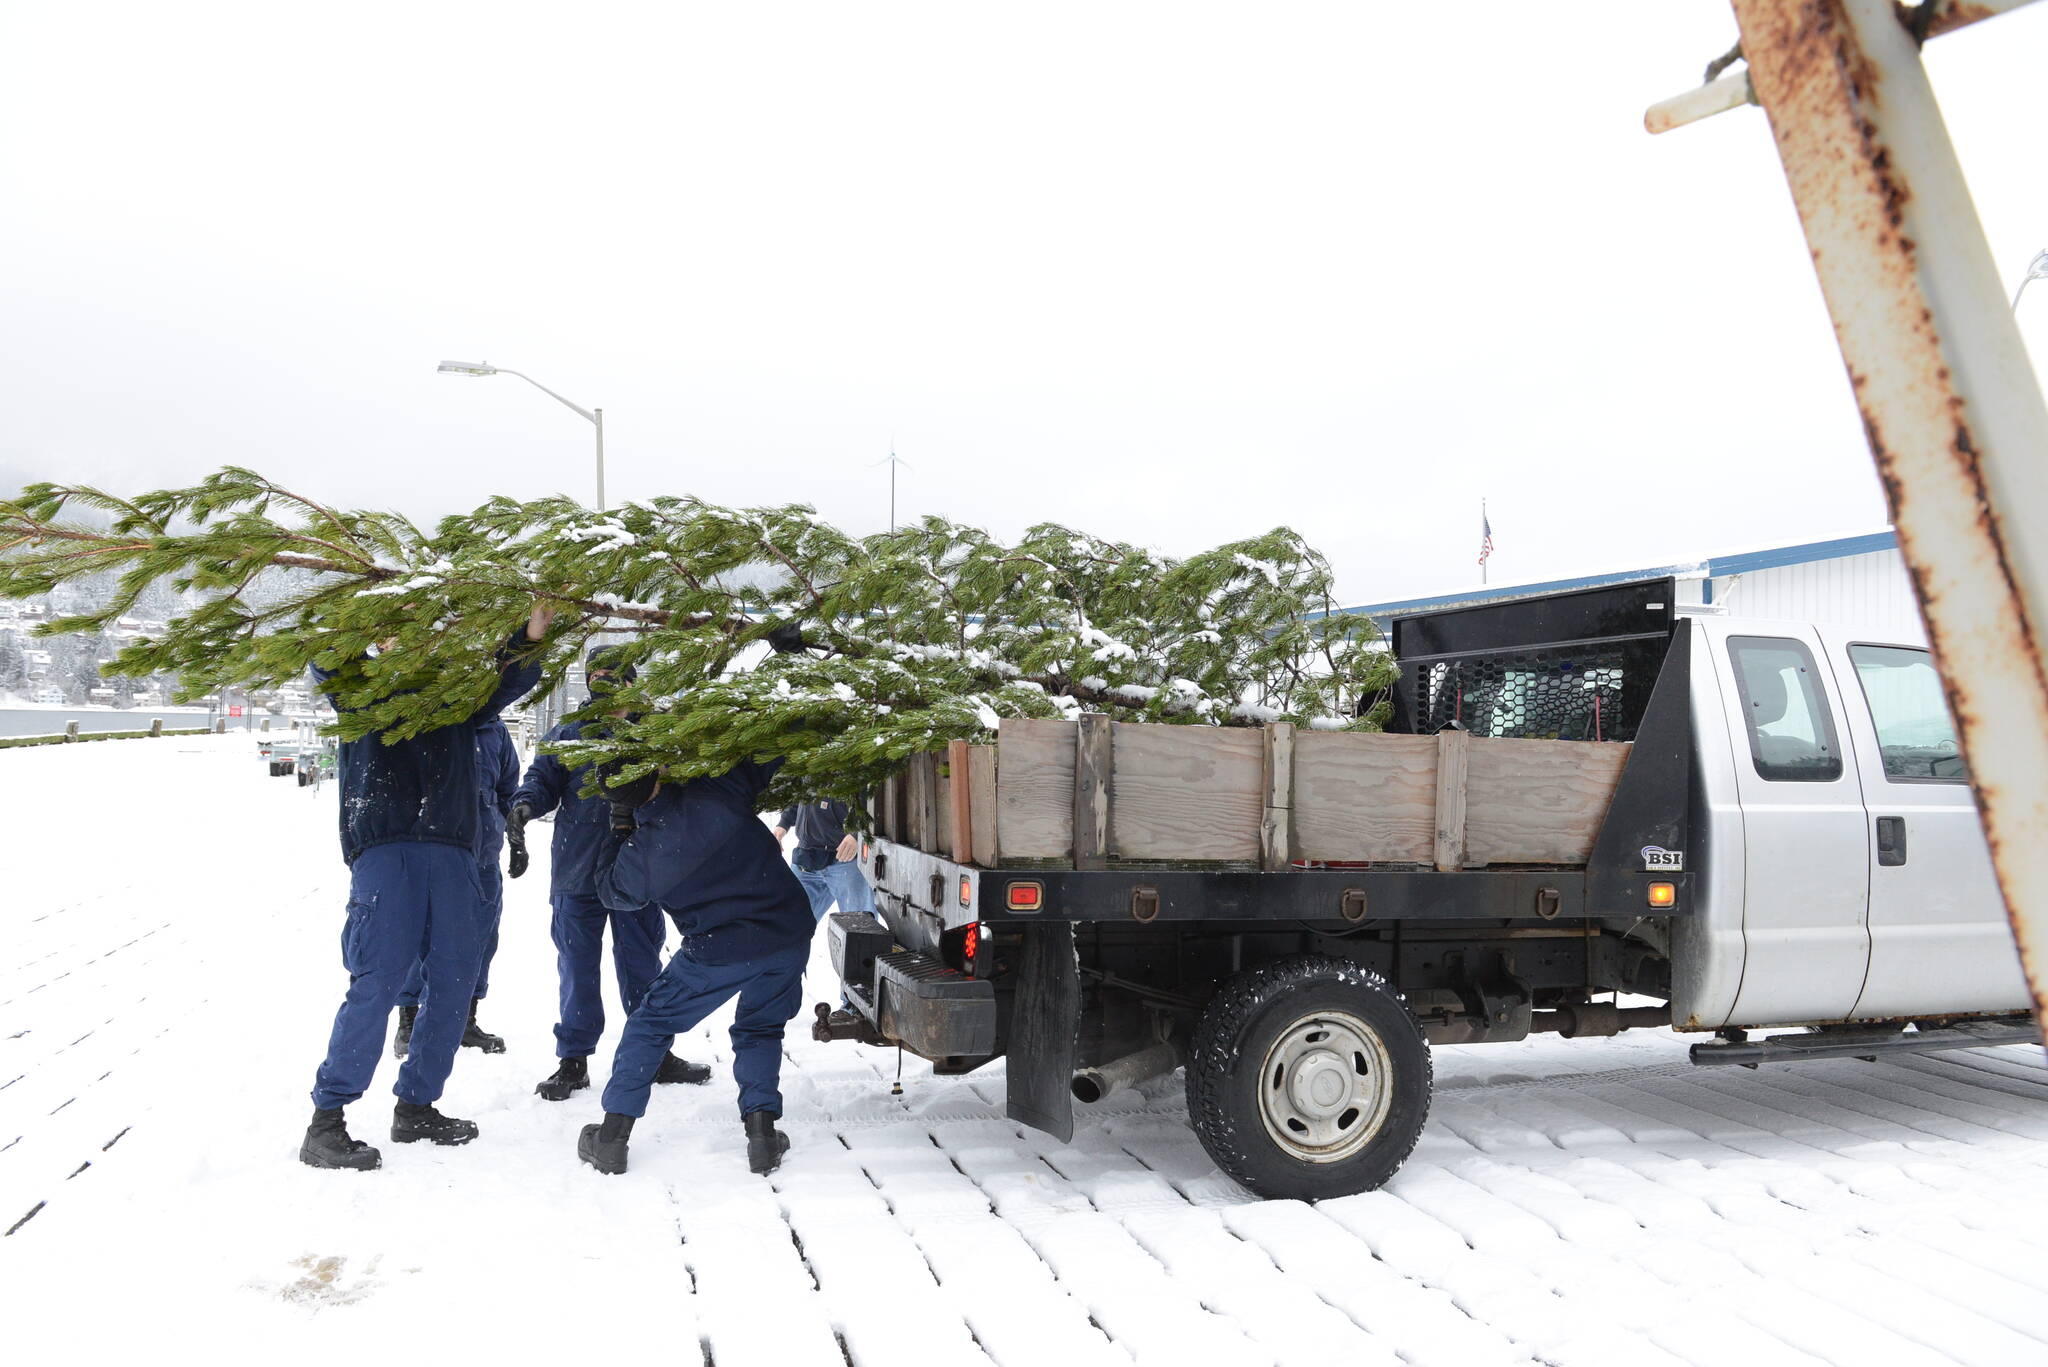 Coast Guardsmen and state employees load the Together Tree bound for the Alaska Governor’s Mansion on a truck on Nov. 29, 2021 after the Coast Guard Cutter Elderberry transported the tree from Wrangell. (USCG photo / Petty Officer 2nd Class Lexie Preston)